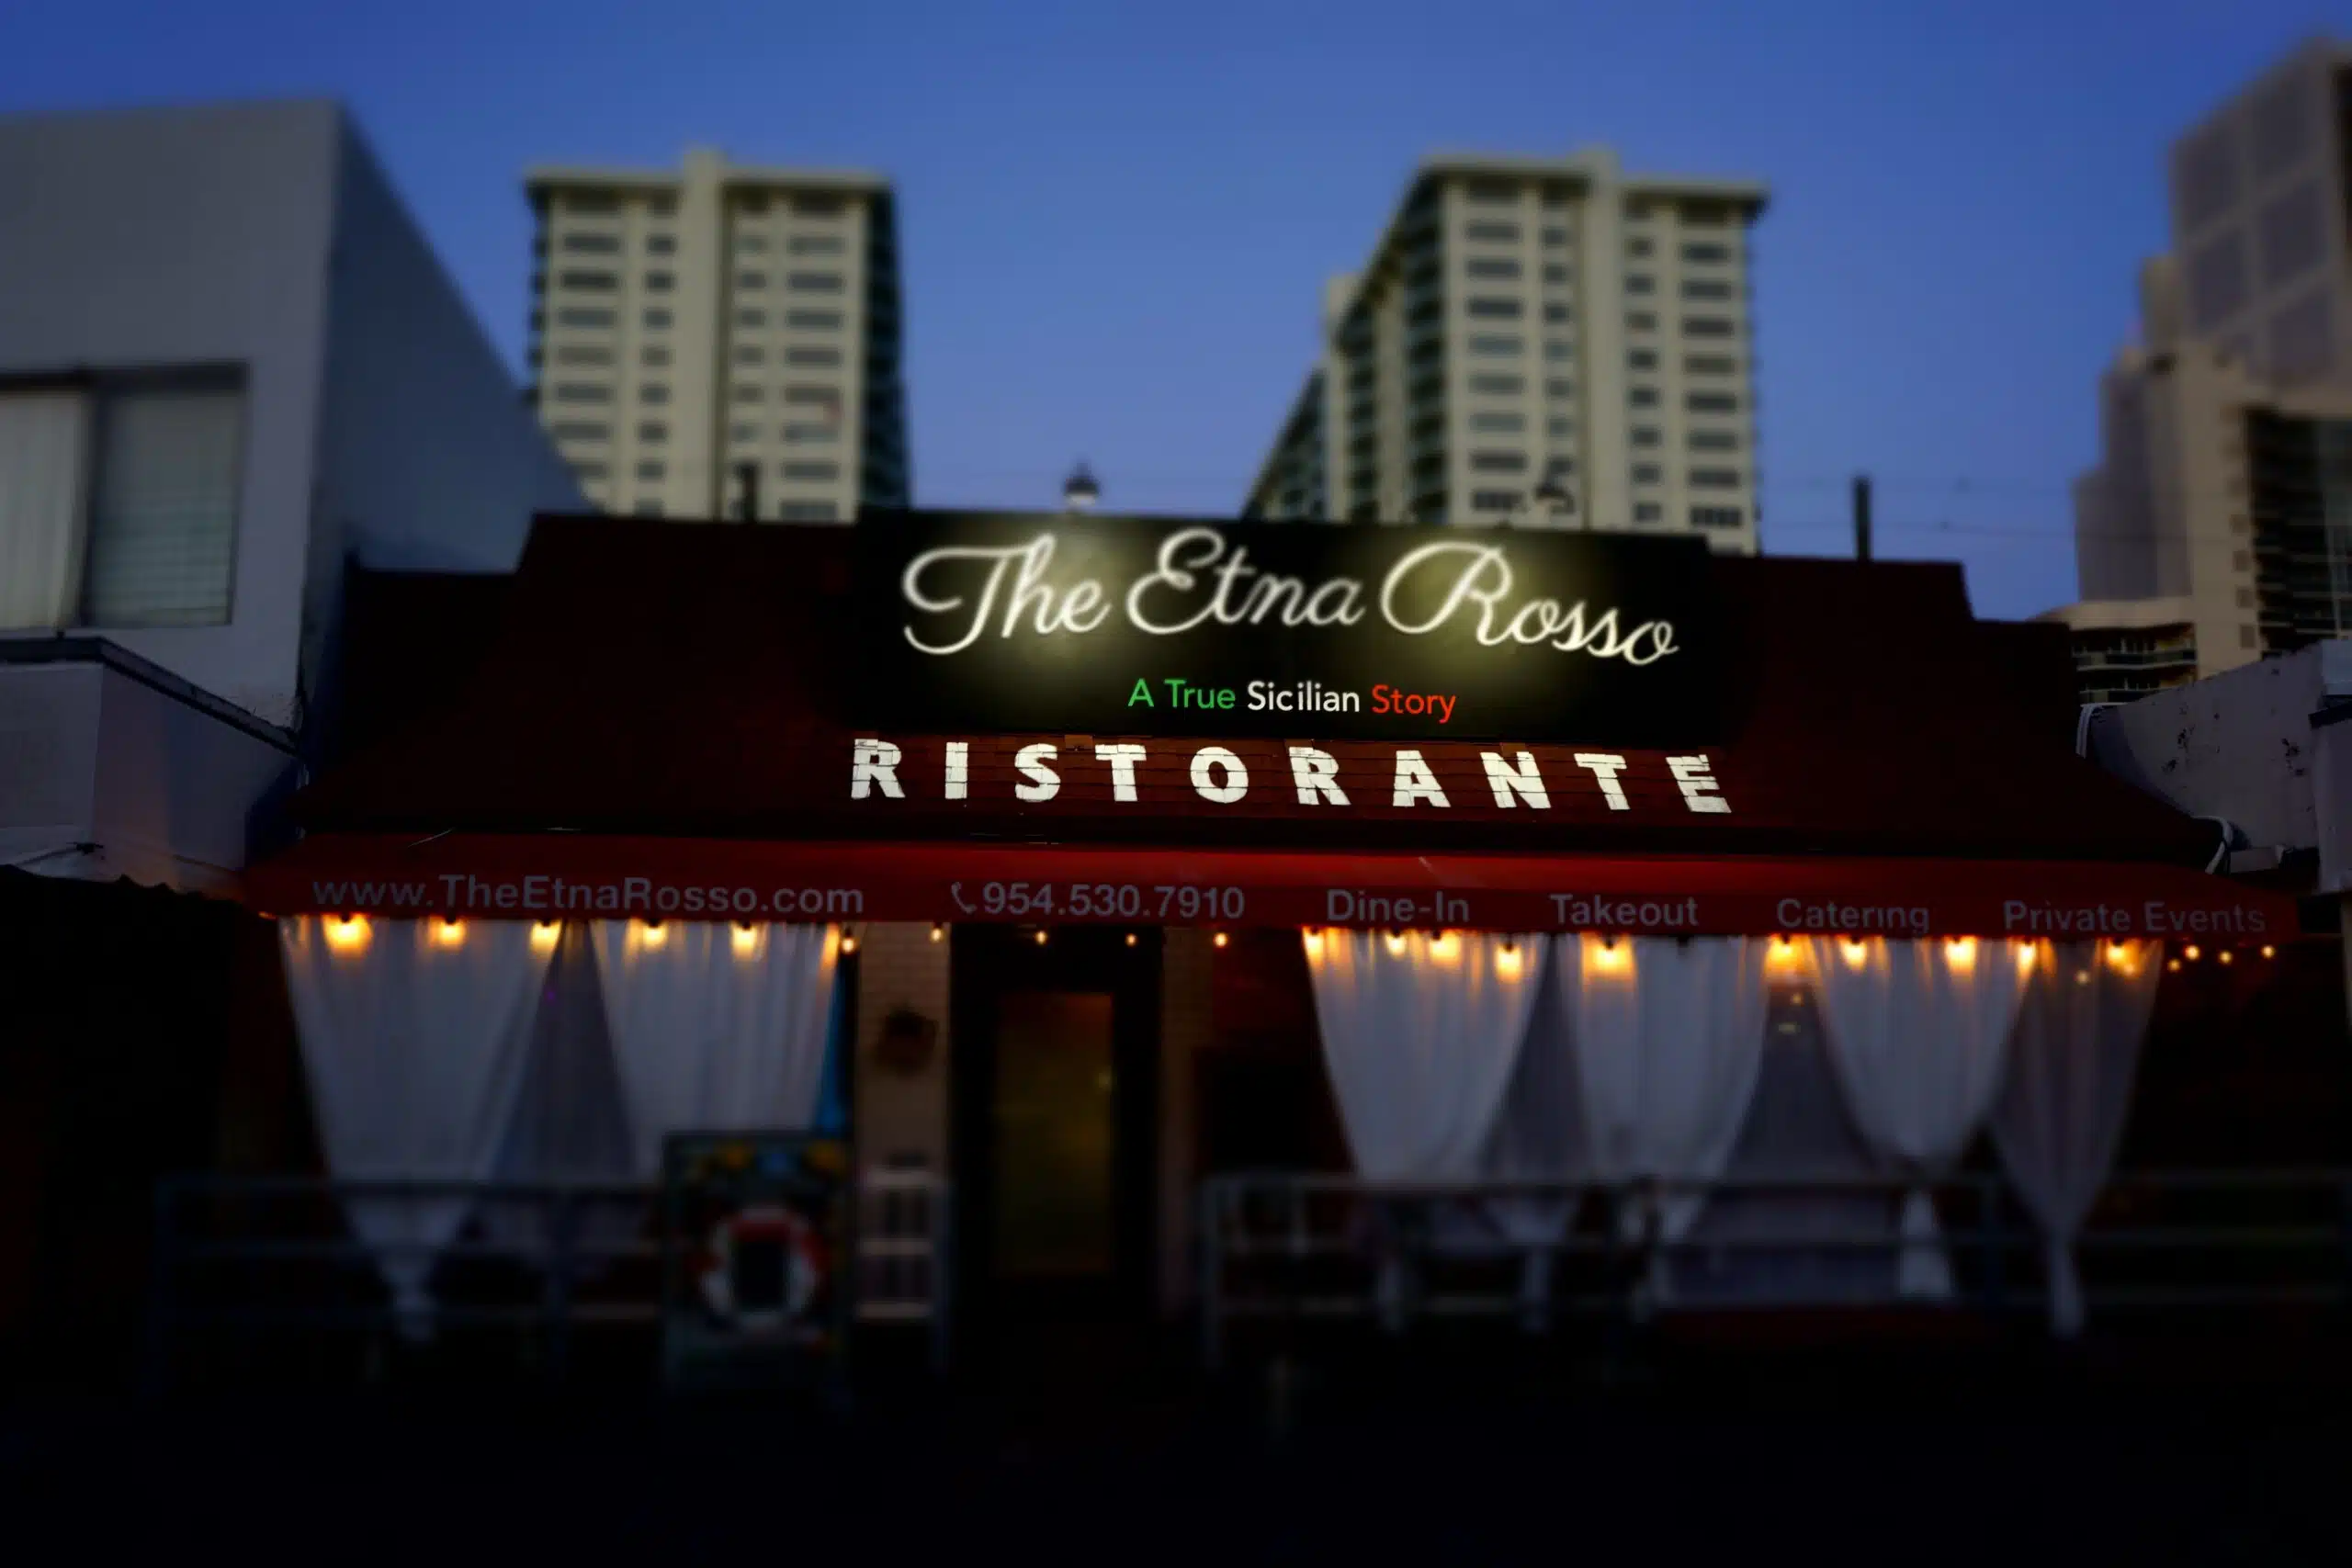 The Etna Rosso Italian Restaurant in Ft Lauderdale : find an open table